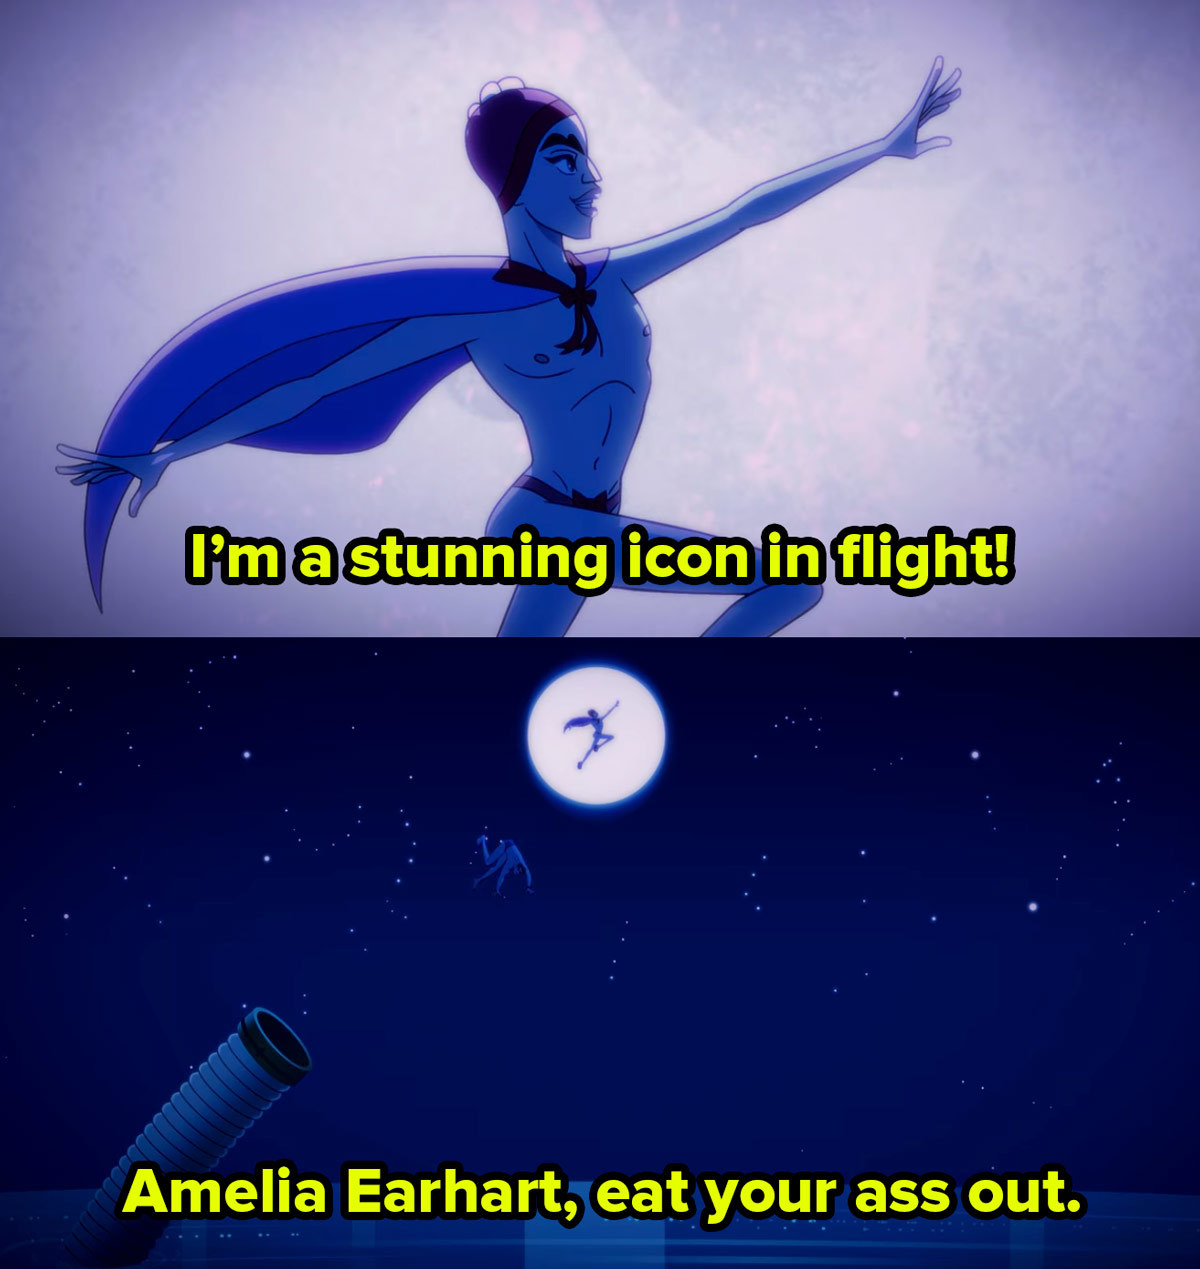 A cartoon man is shot out of a canon in the night and poses in front of the moon saying I’m a stunning icon in flight, Amelia Earhart, eat your ass out